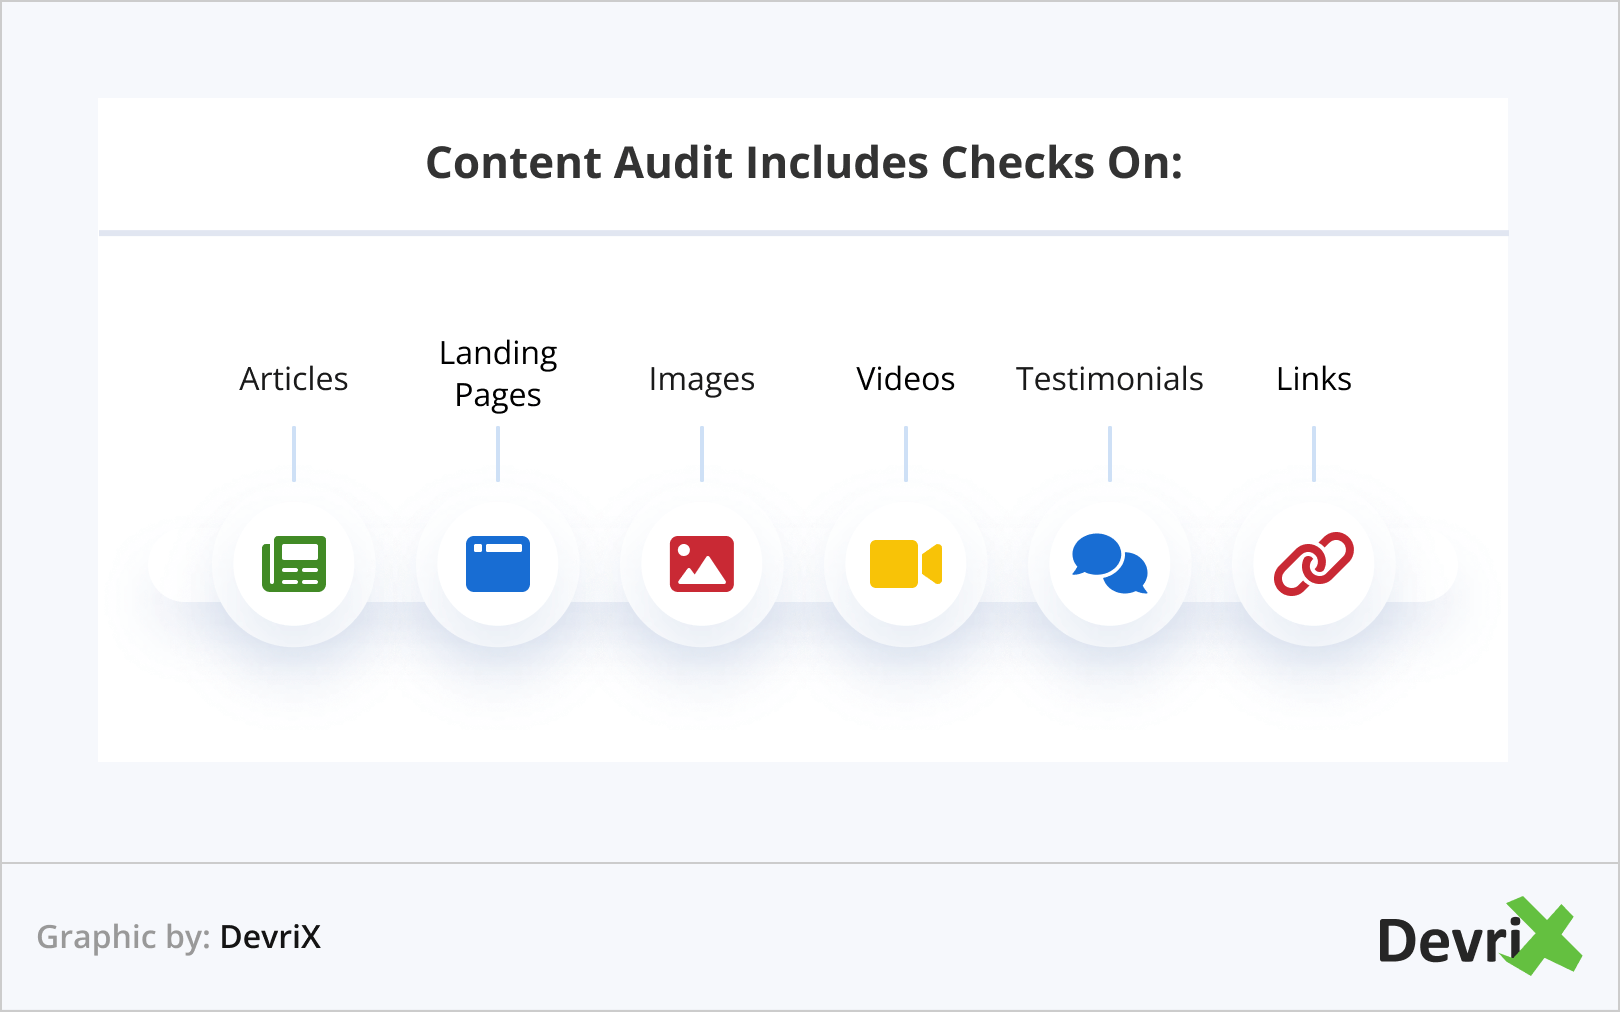 Content Audit Includes Checks On